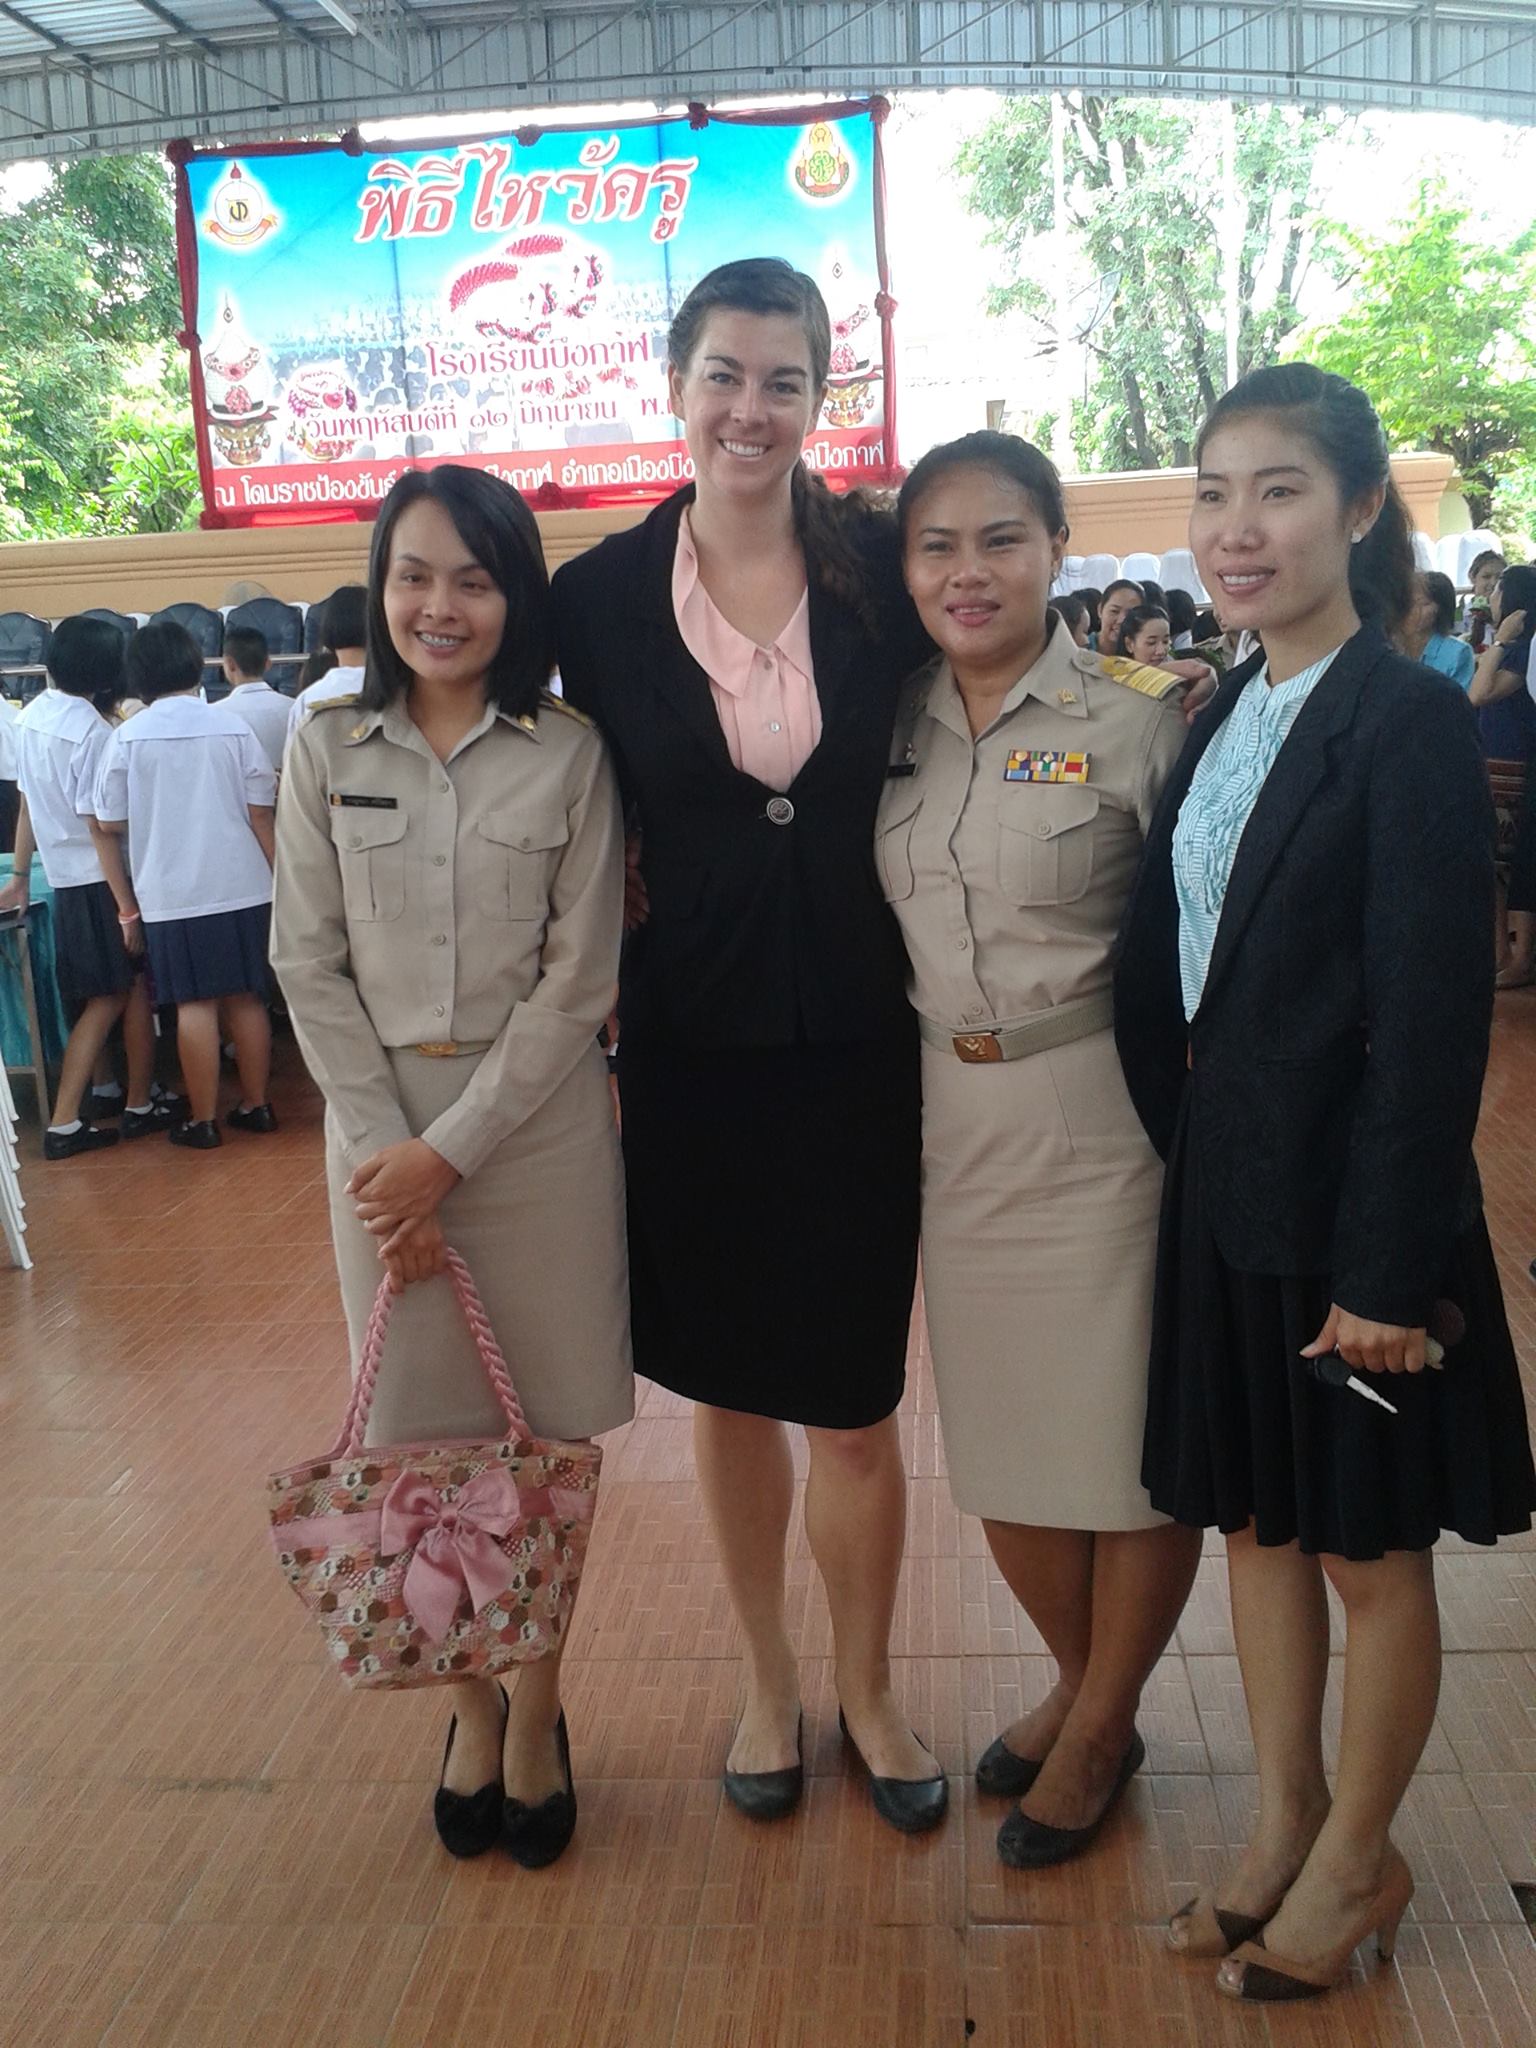 English and Thai teachers in formal wear